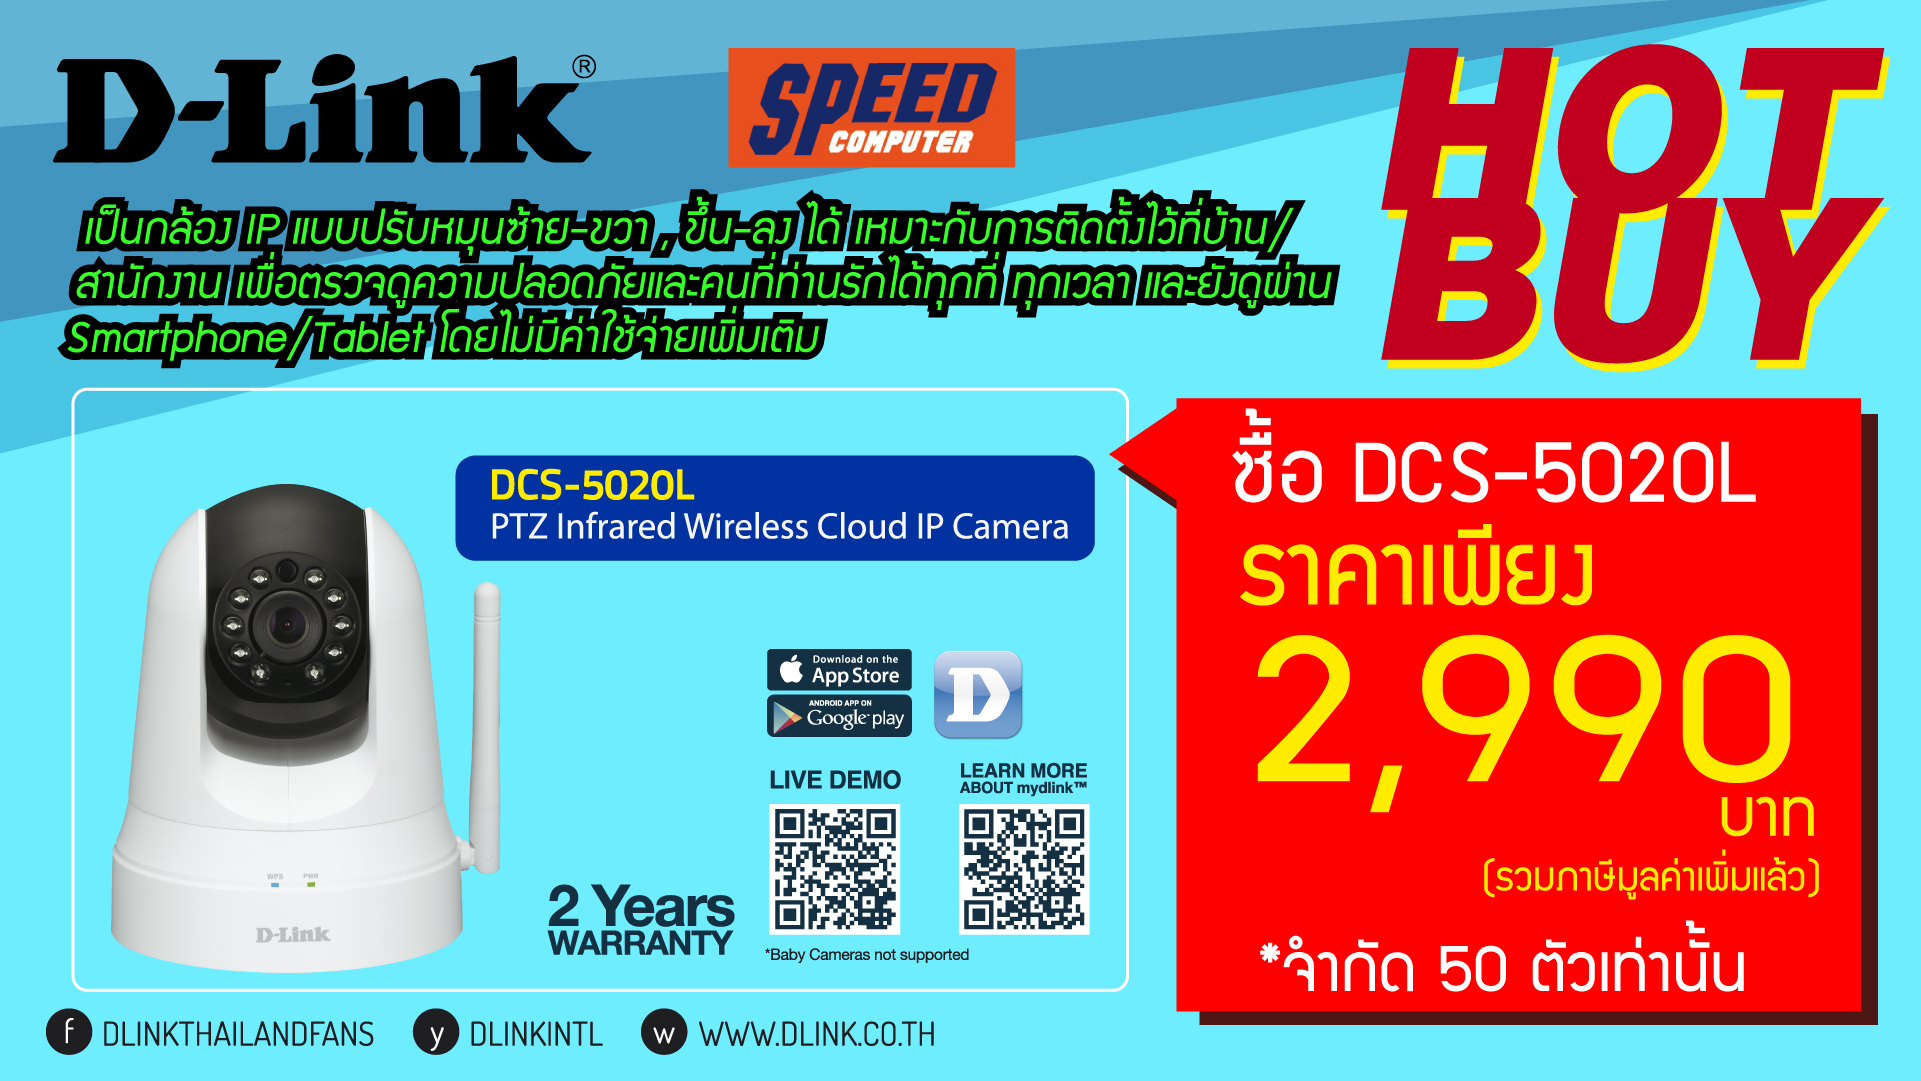 D-Link-Commart-Screen-for-Speed-March-16-05